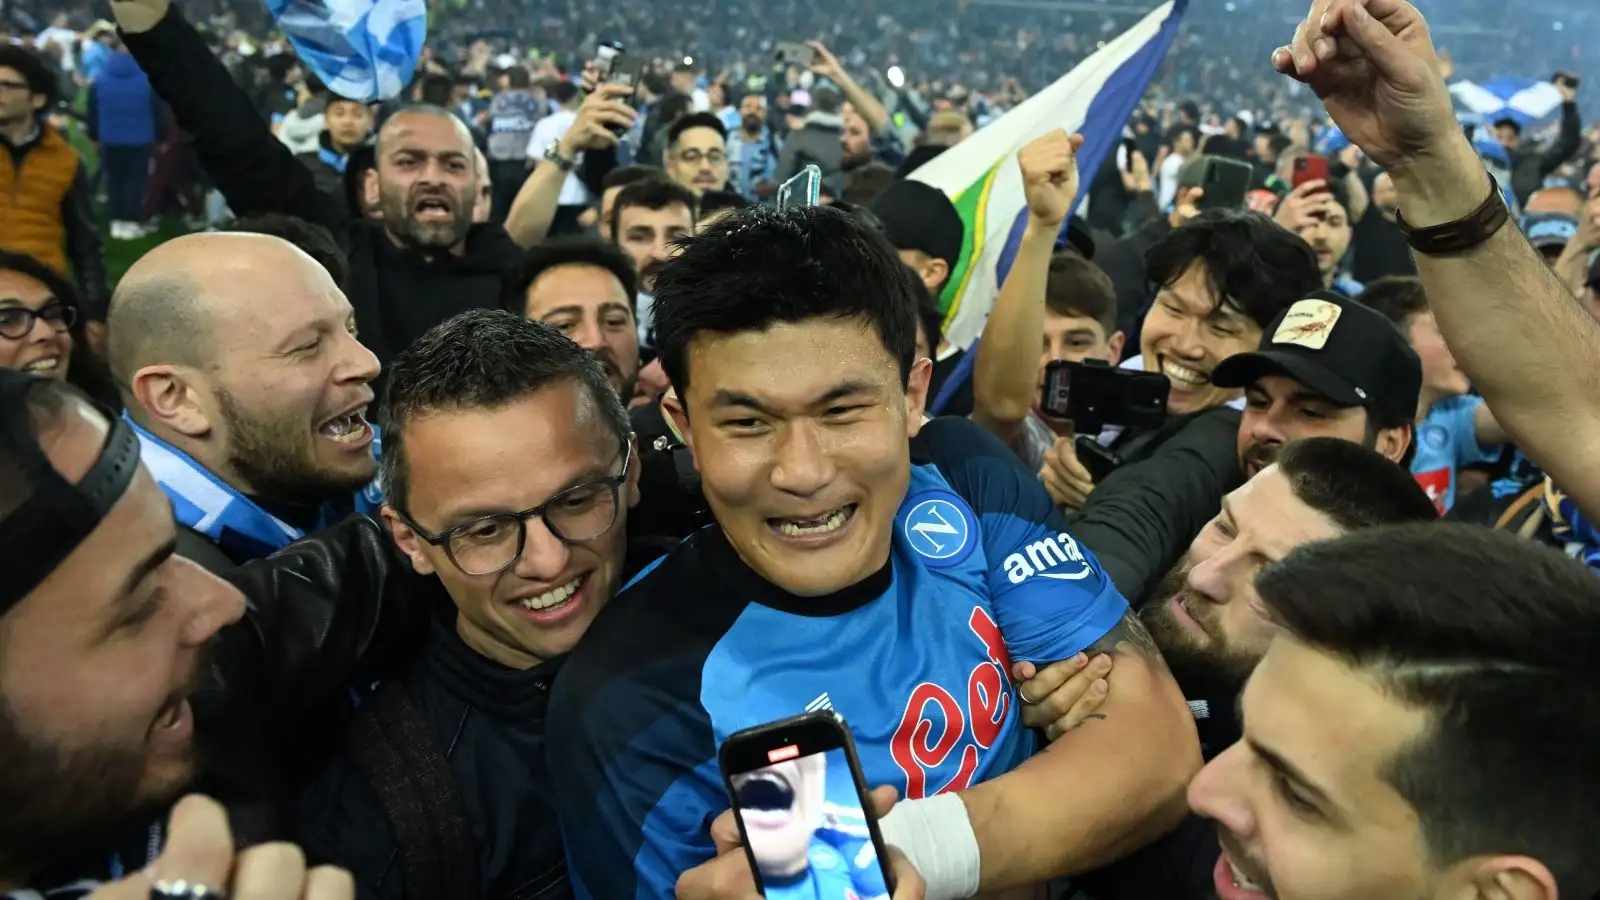 Manchester United-linked Kim Min-jae is mobbed by fans after Napoli win Serie A